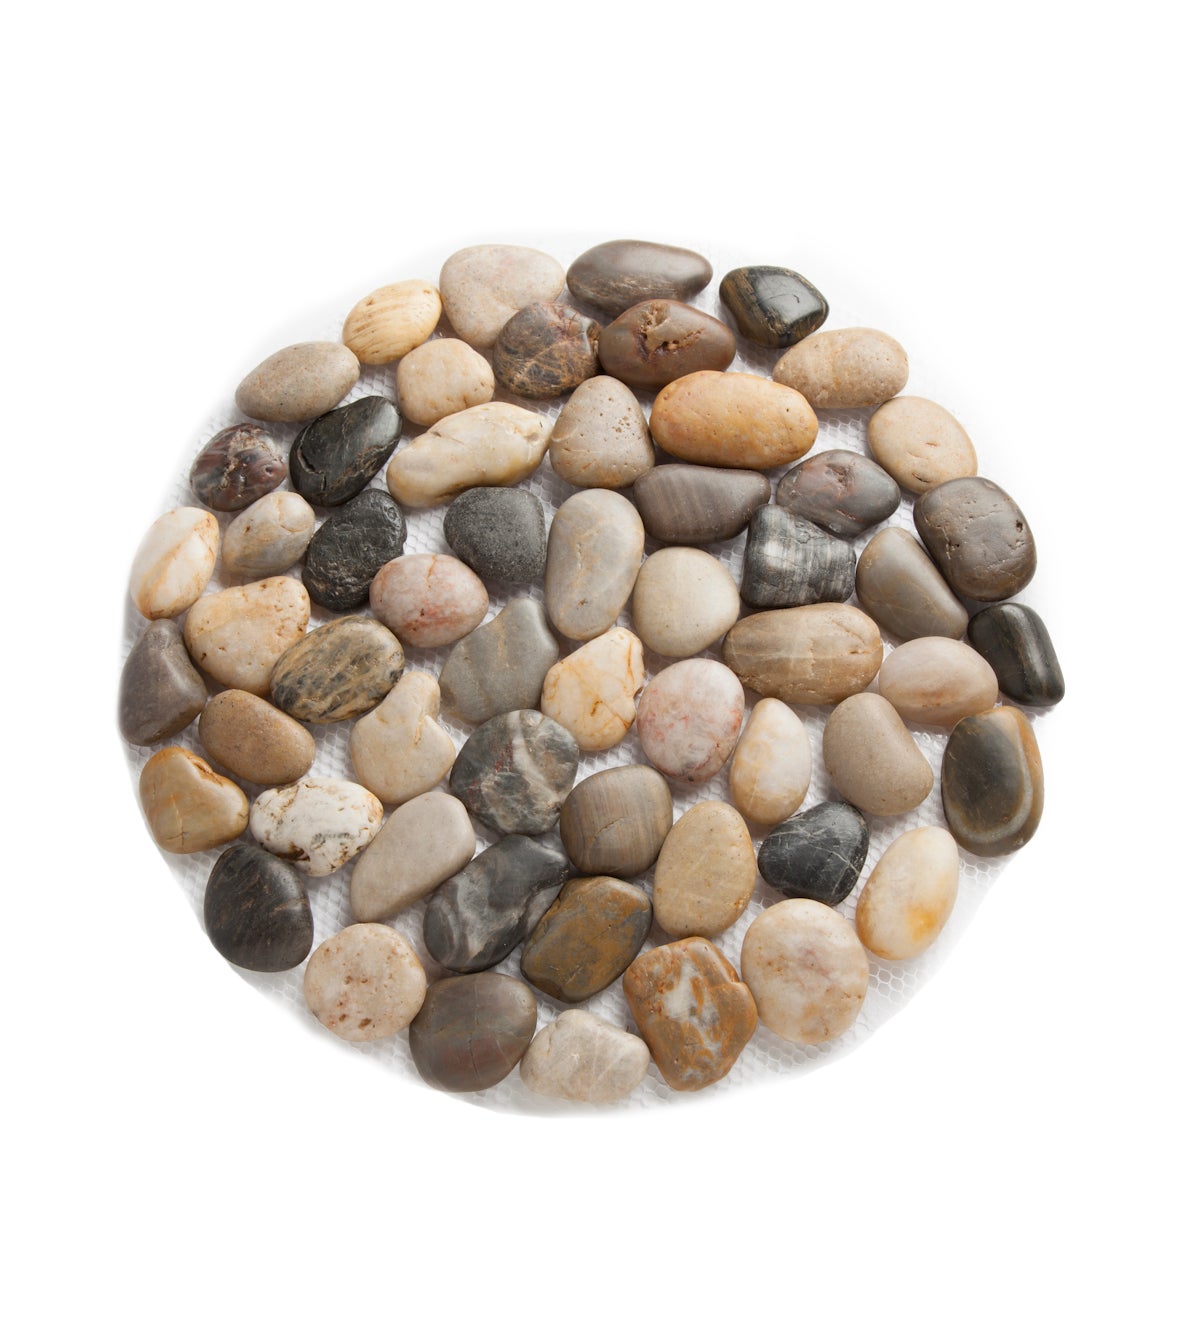 Natural River Rock Stepping Stones with Flexible PVC Backing, Set of 3